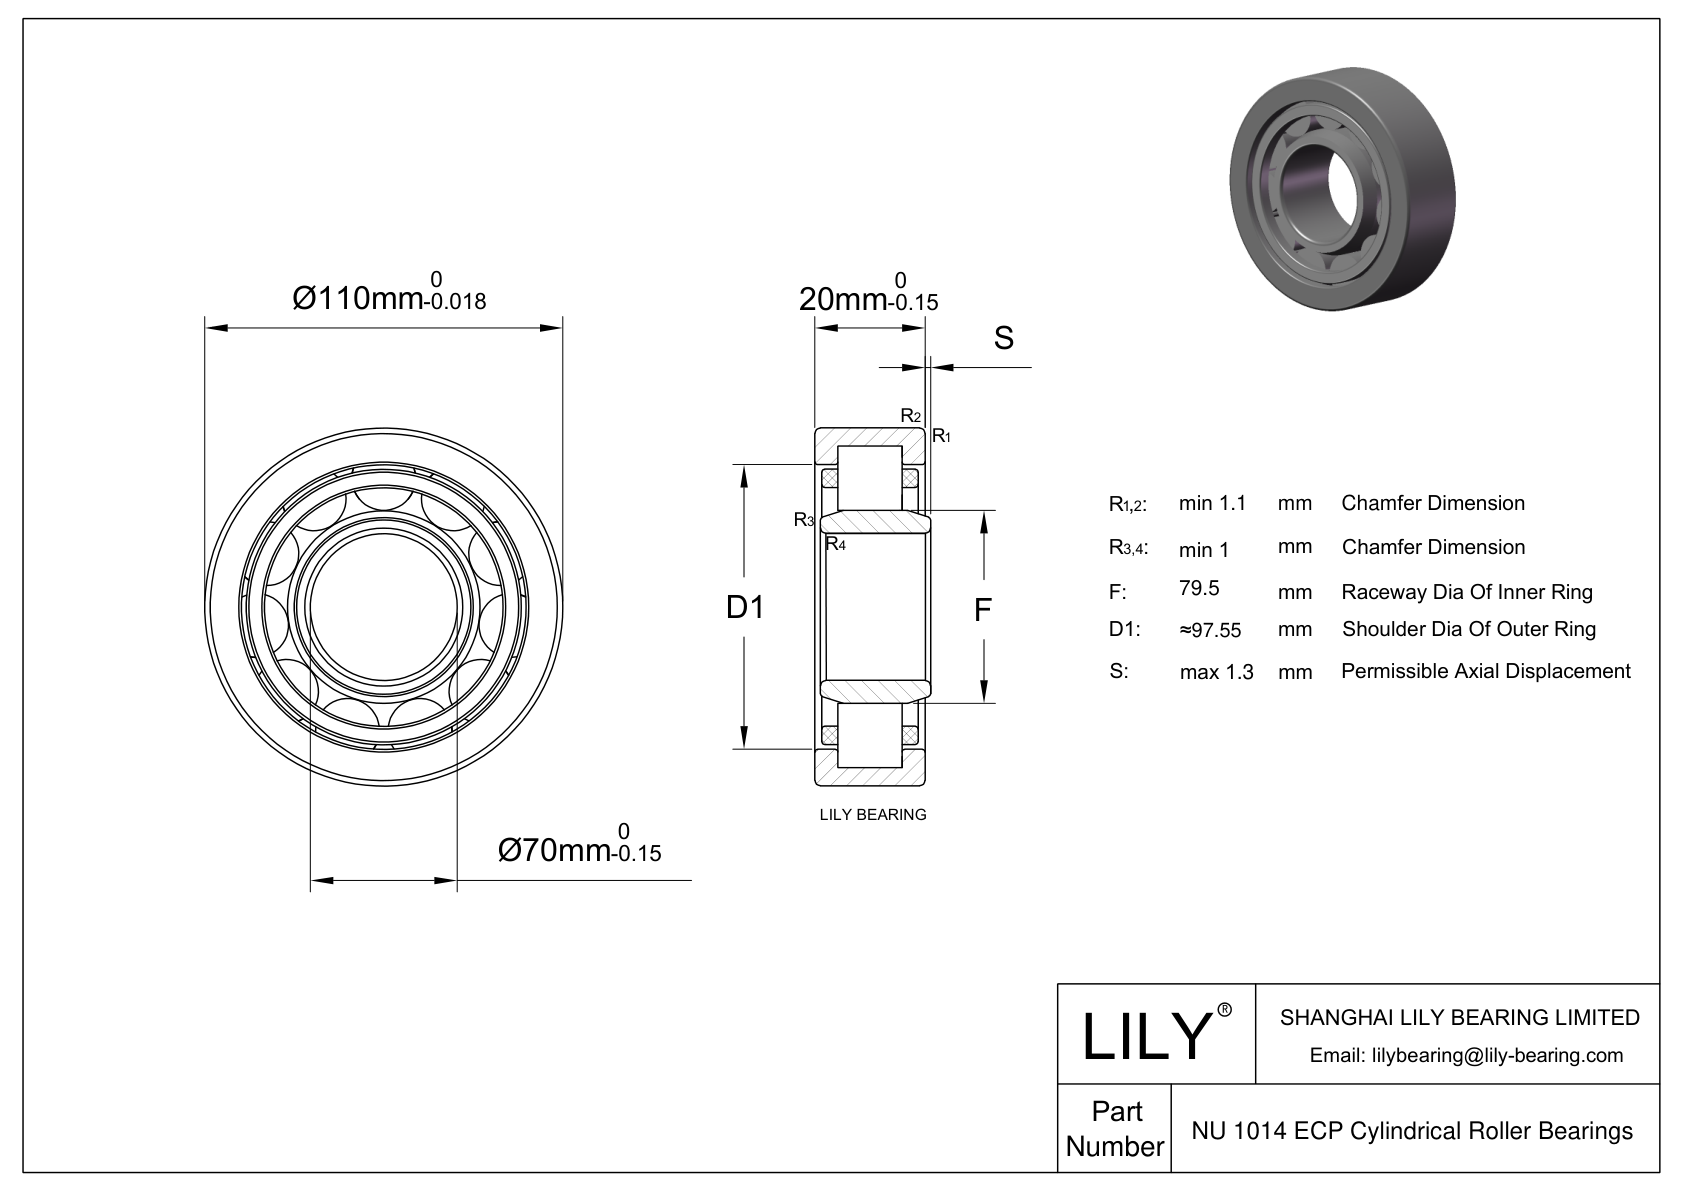 NU 1014 ECP/C3VL0241 Ceramic Coated Cylindrical Roller Bearings cad drawing